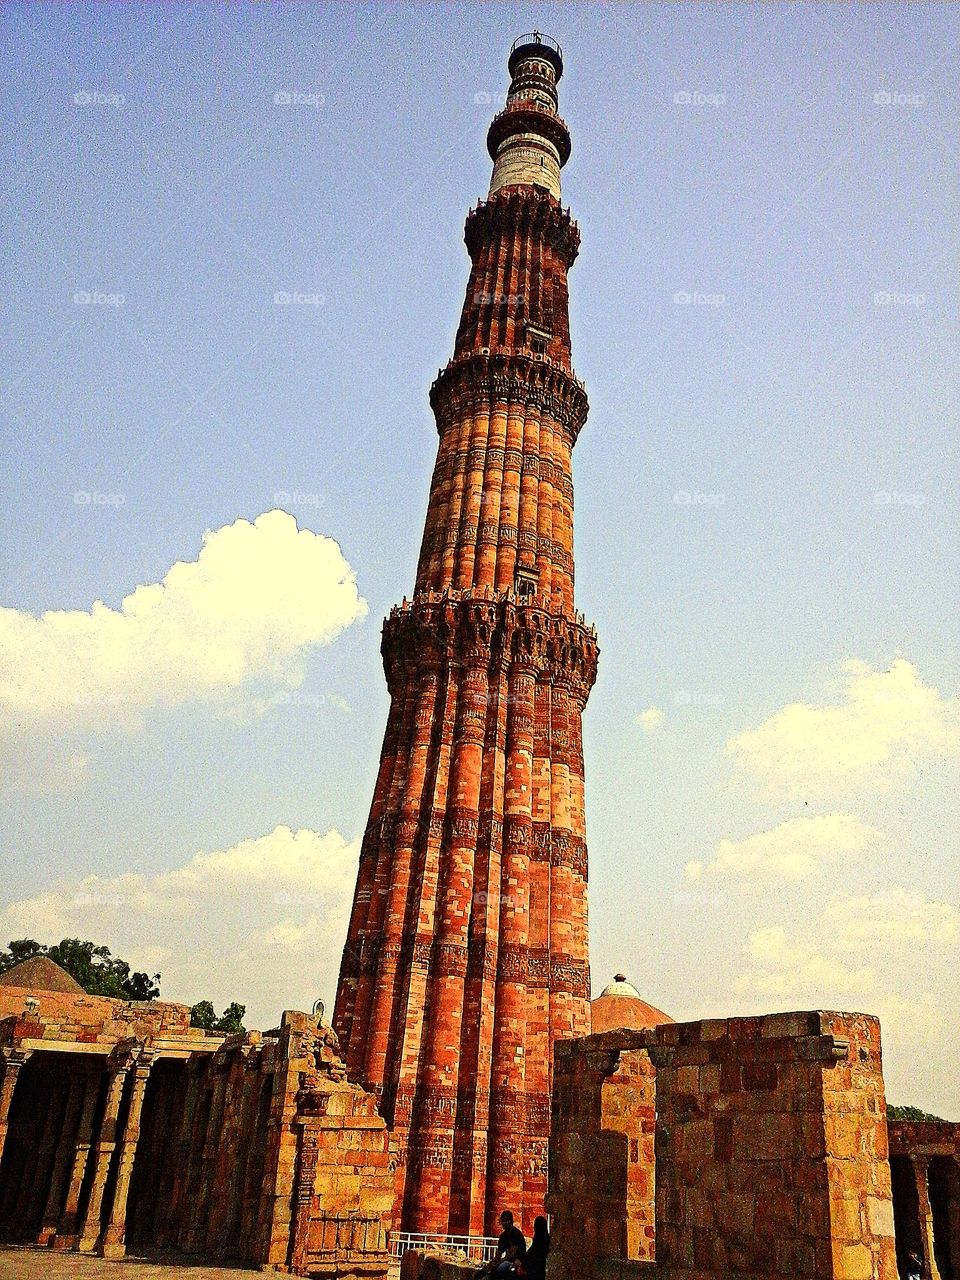 Qutb-Minar in red and buff standstone is the highest tower in India. It has a diameter of 14.32 m at the base and about 2.75 m on the top with a height of 72.5 m.
Qutbu'd-Din Aibak laid the foundation of Minar in AD 1199 for the use of the mu'azzin (crier) to give calls for prayer and raised the first storey, to which were added three more storeys by his successor and son-in-law, Shamsu'd-Din Iltutmish (AD 1211-36).